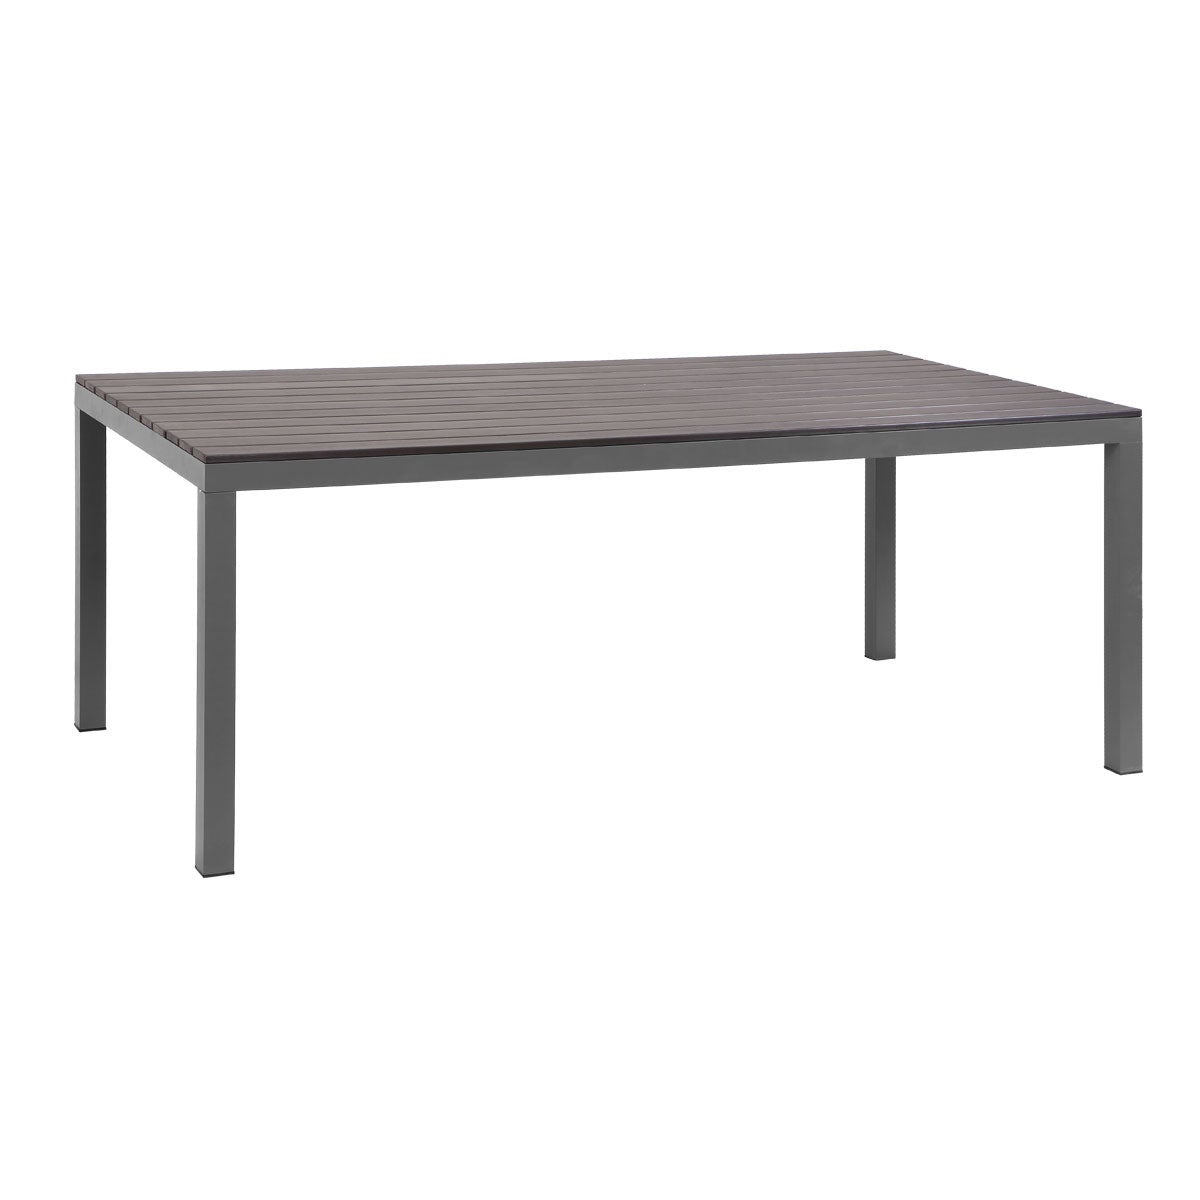 Manly Charcoal Aluminium Outdoor Dining Table with Faux wood Top (180x95cm)